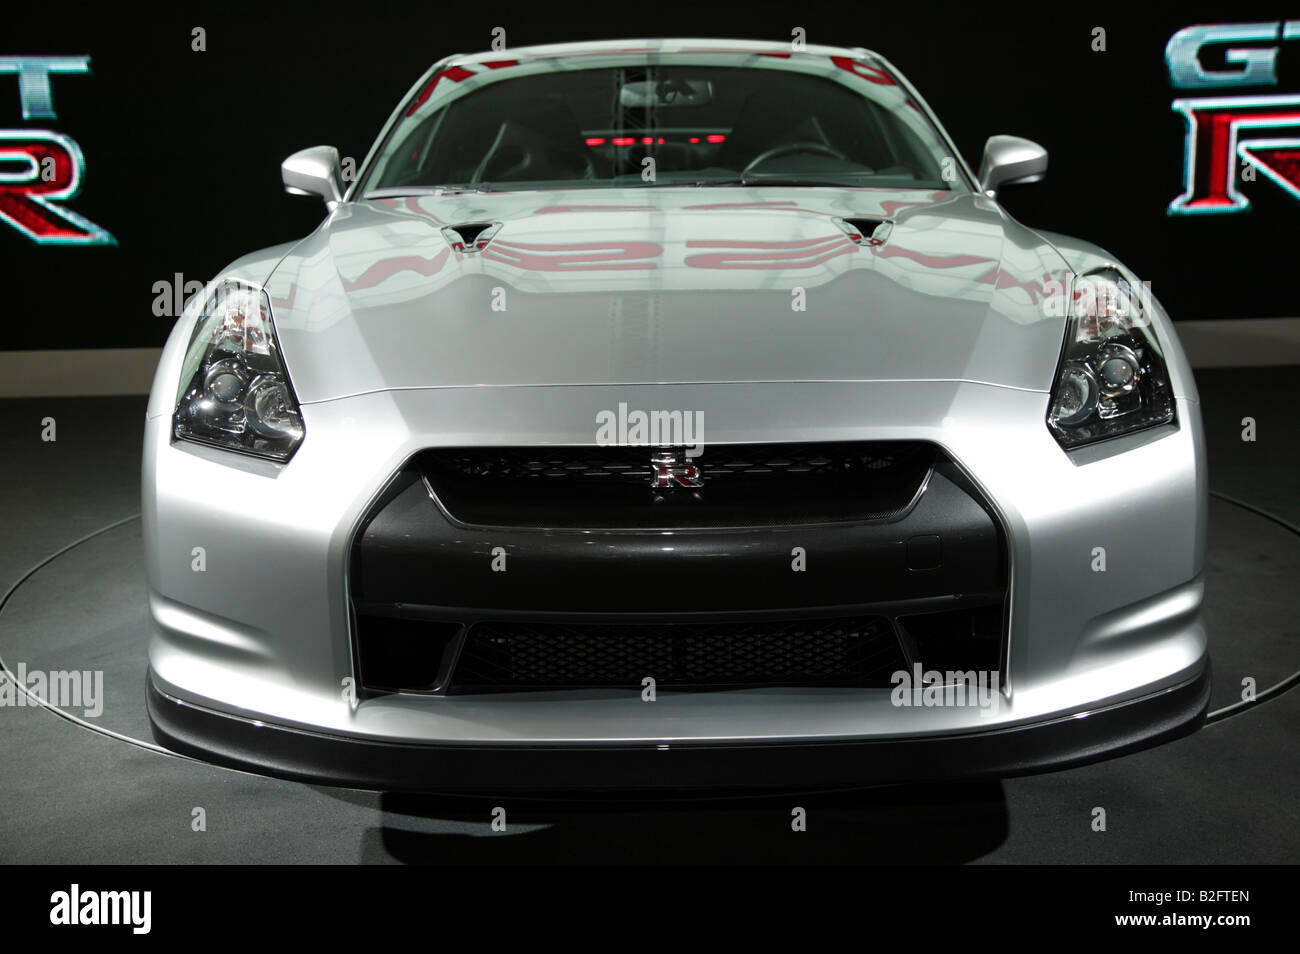 Front view of a Nissan GT-R on display at the 2008 London Motor Show Stock Photo